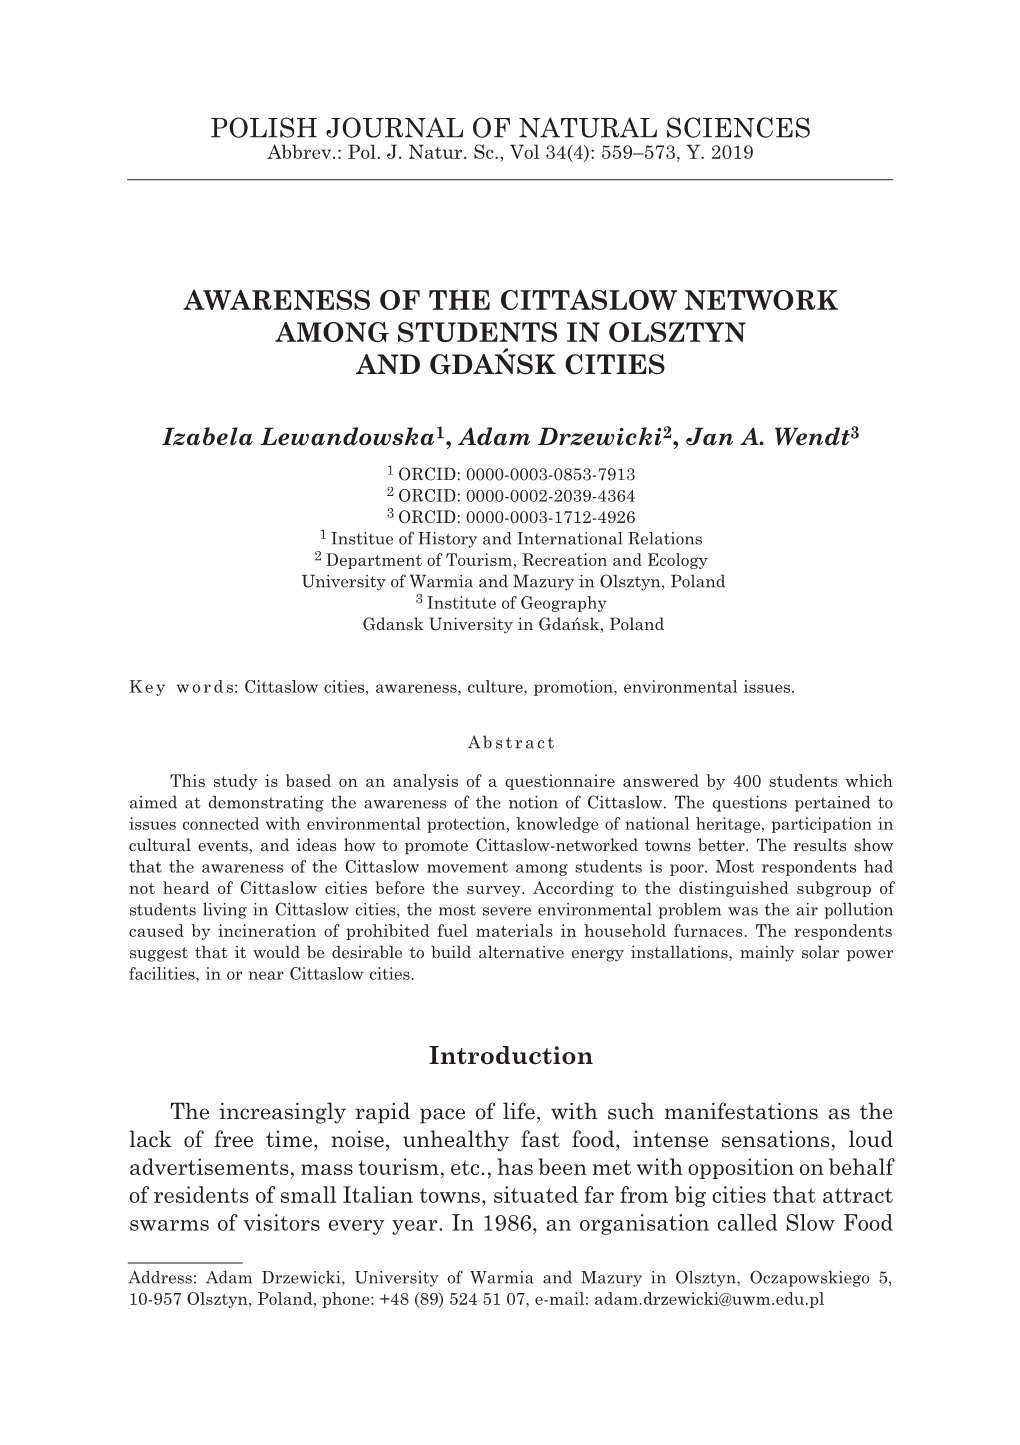 Polish Journal of Natural Sciences Awareness of the Cittaslow Network Among Students in Olsztyn and Gdańsk Cities